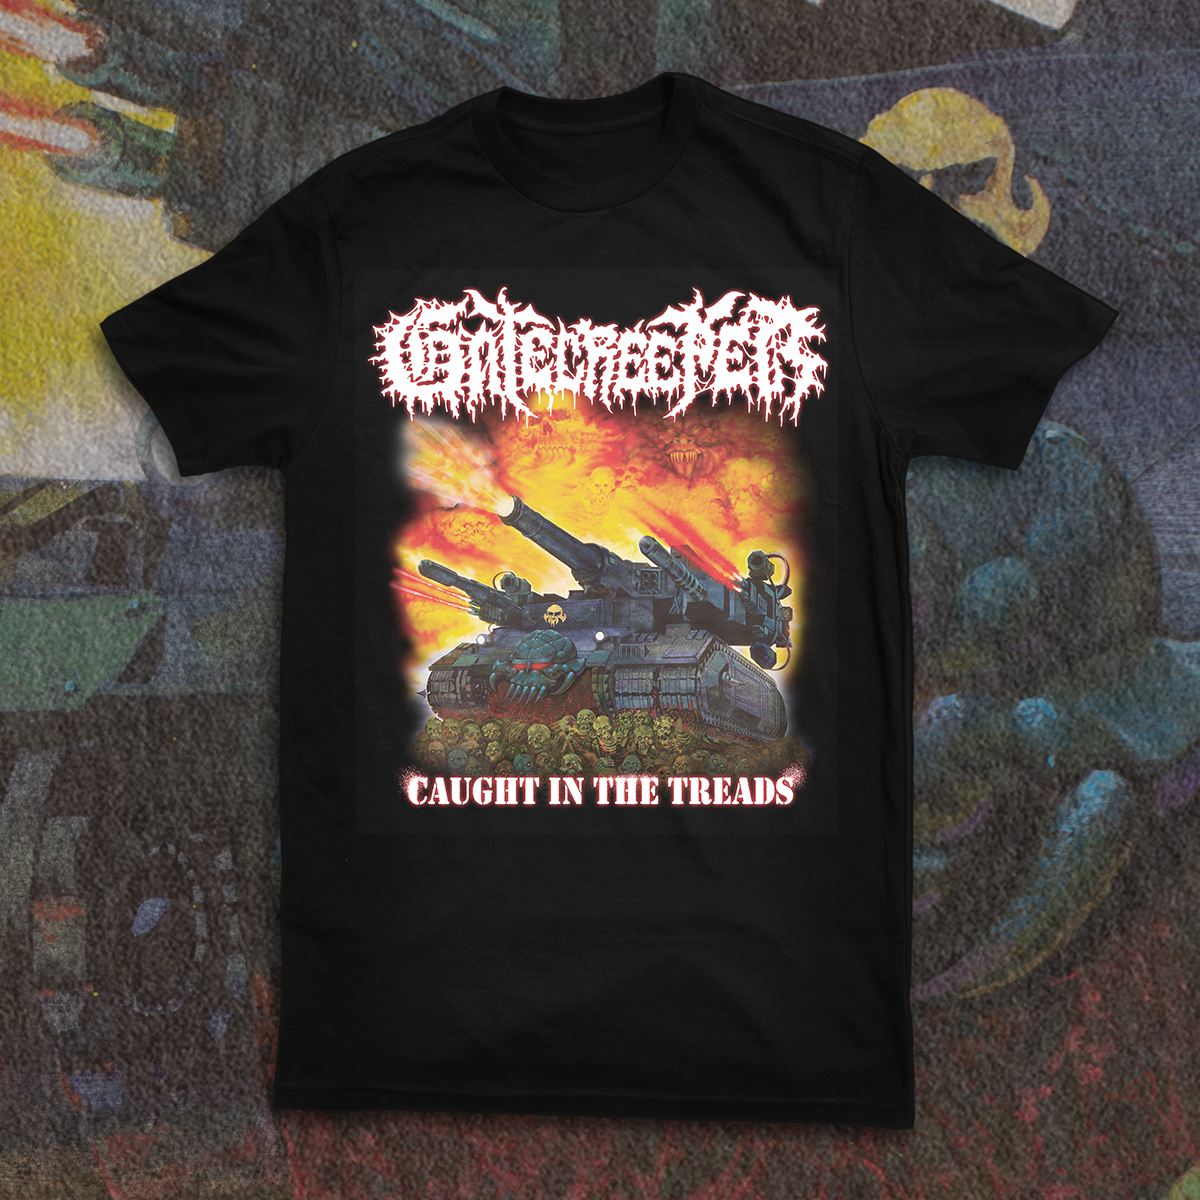 GATECREEPER "CAUGHT IN THE TREADS" SHIRT